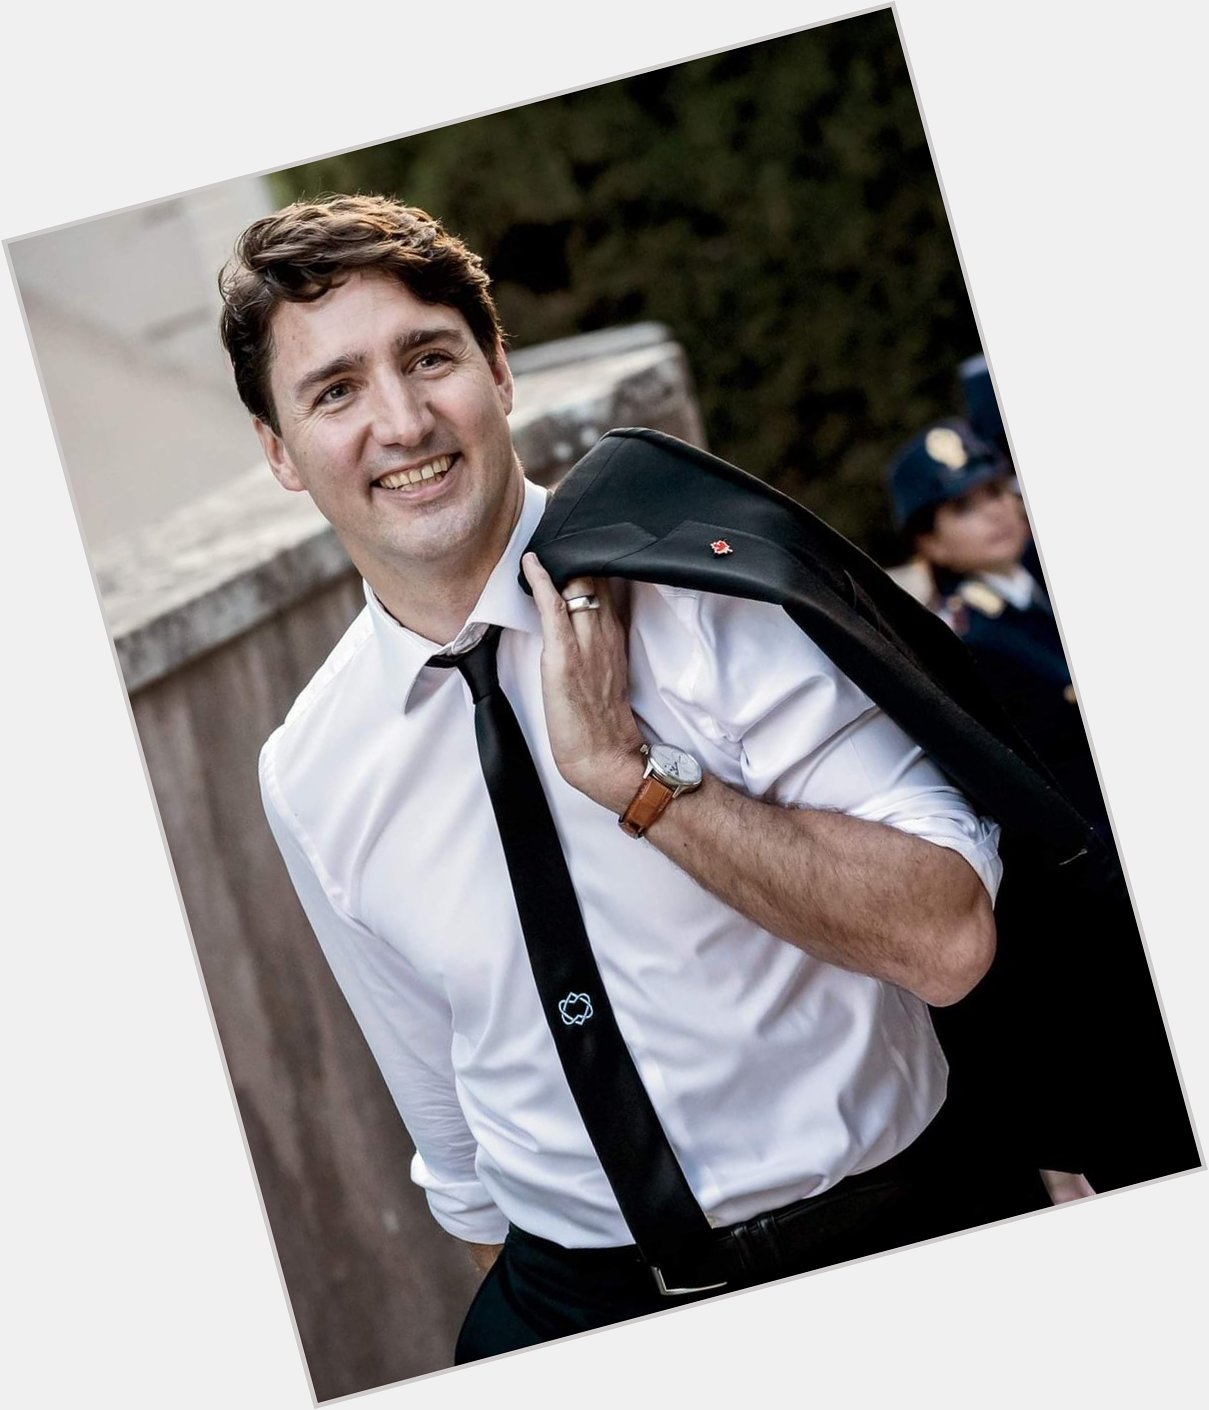 Happy Birthday to our Prime Minister Justin Trudeau! 